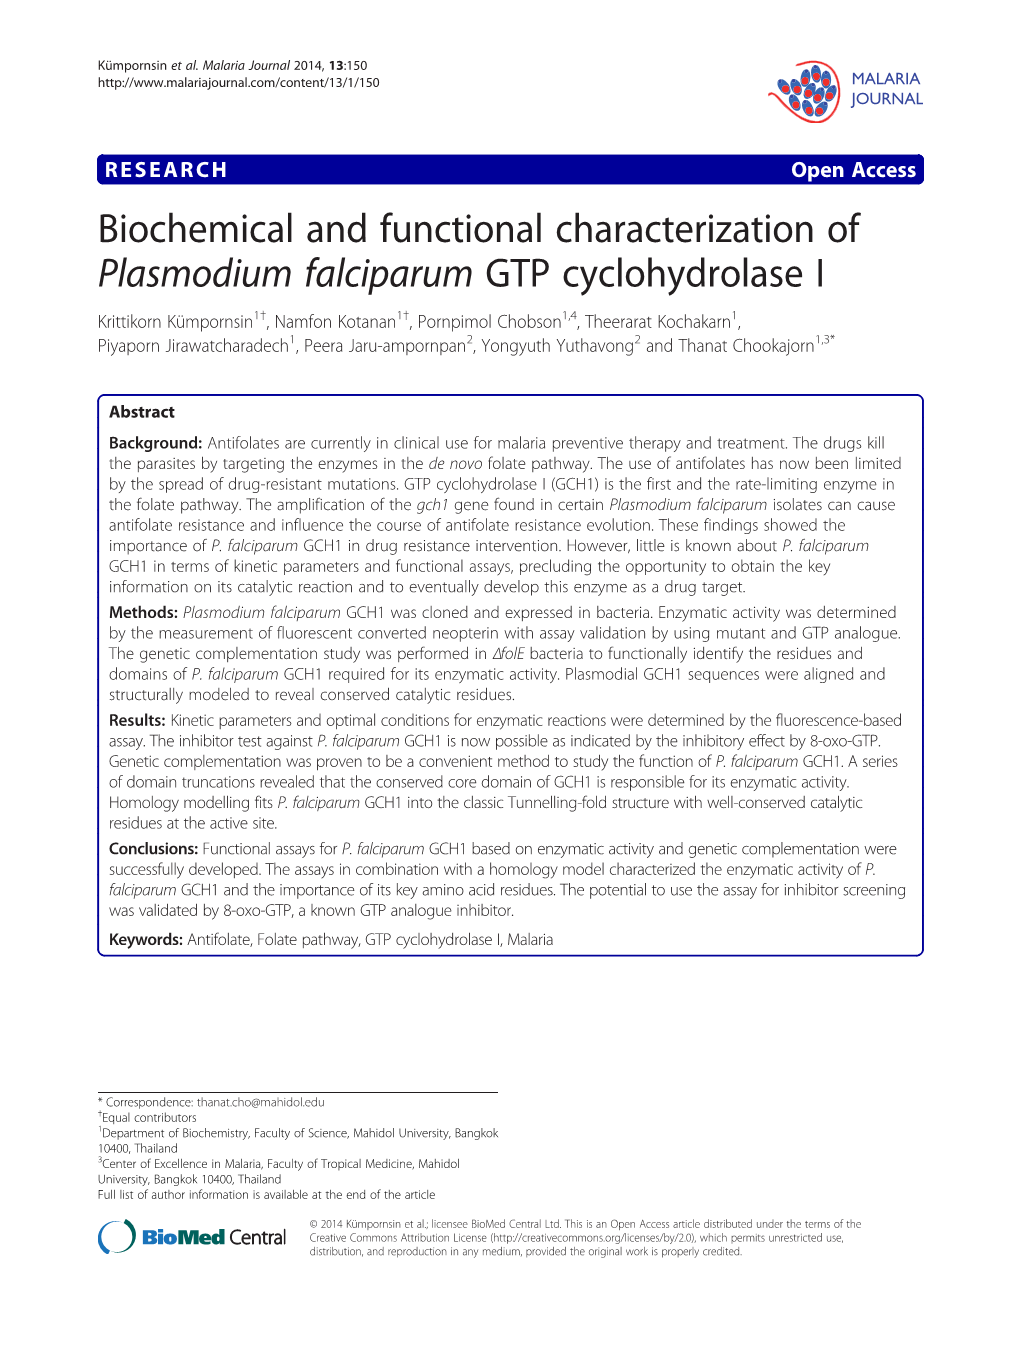 Biochemical and Functional Characterization of Plasmodium